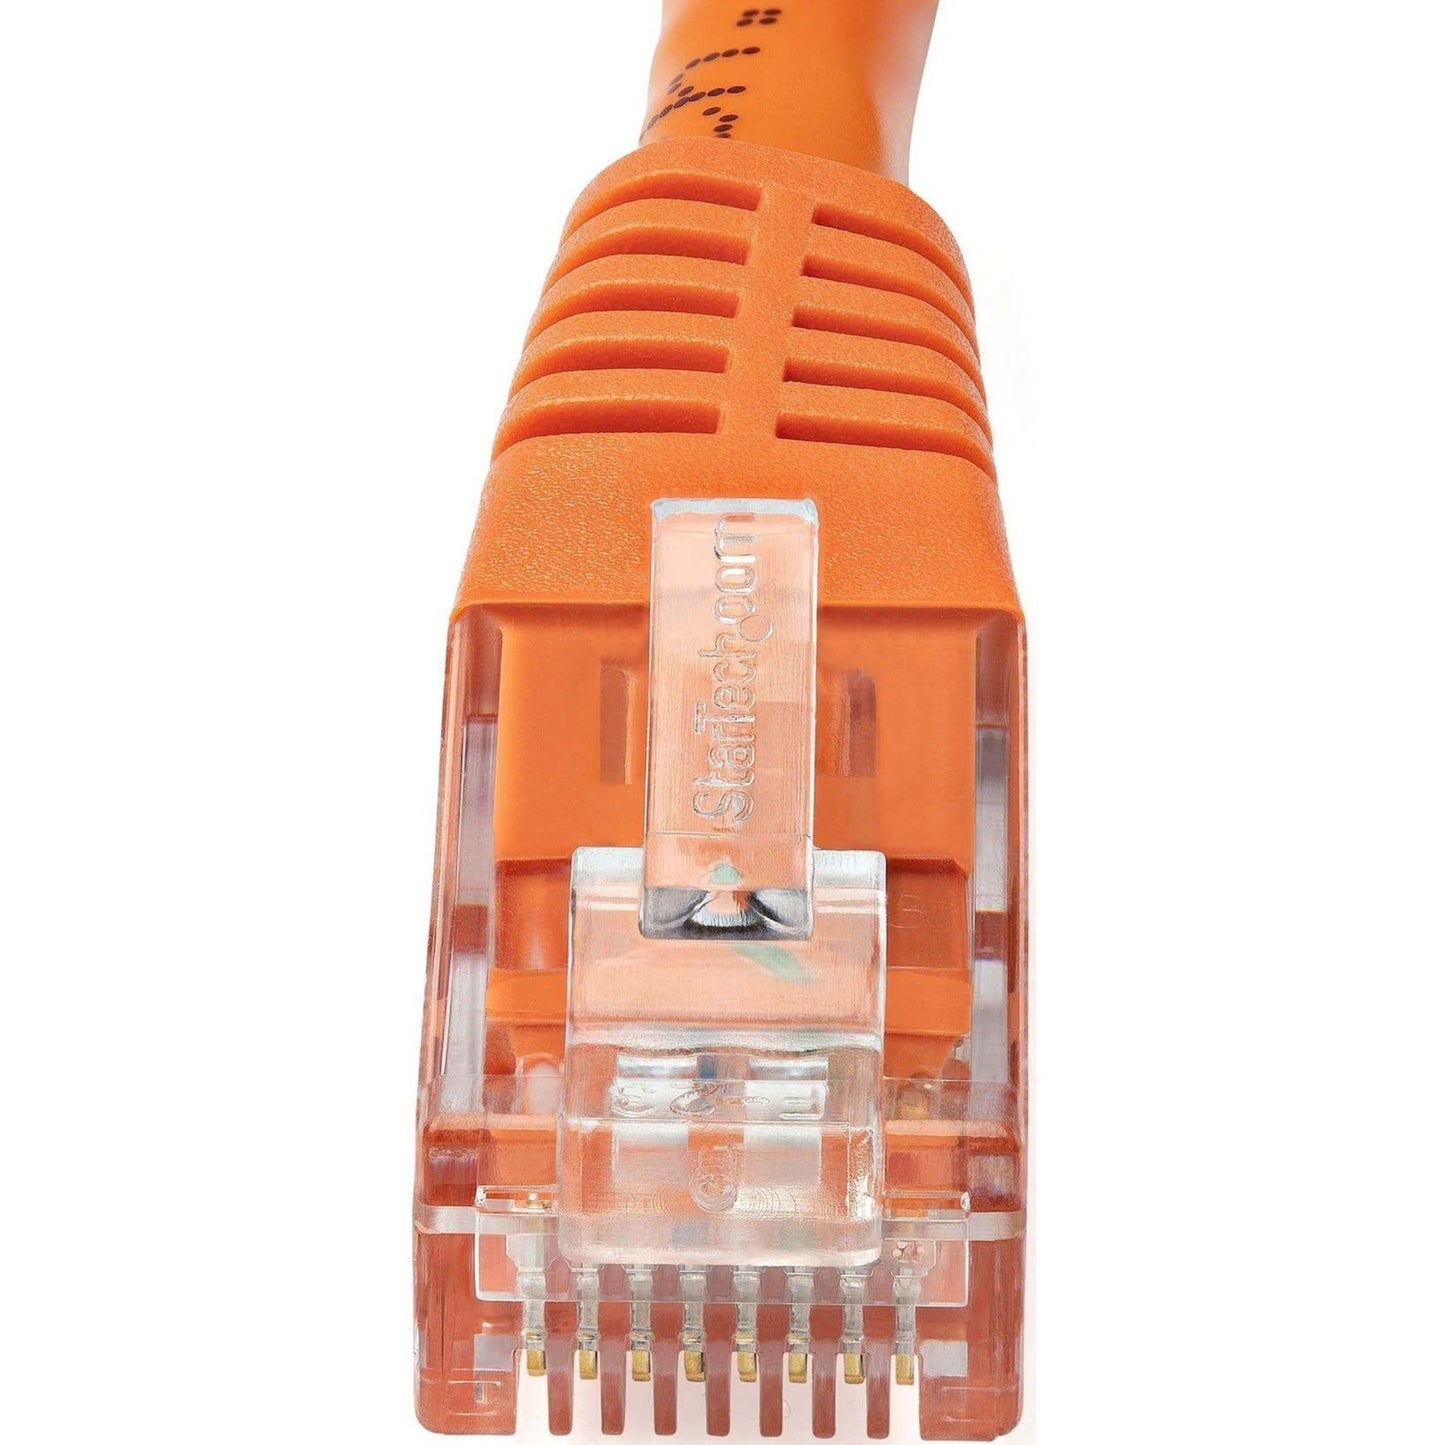 StarTech.com 35ft CAT6 Ethernet Cable - Orange Molded Gigabit - 100W PoE UTP 650MHz - Category 6 Patch Cord UL Certified Wiring/TIA